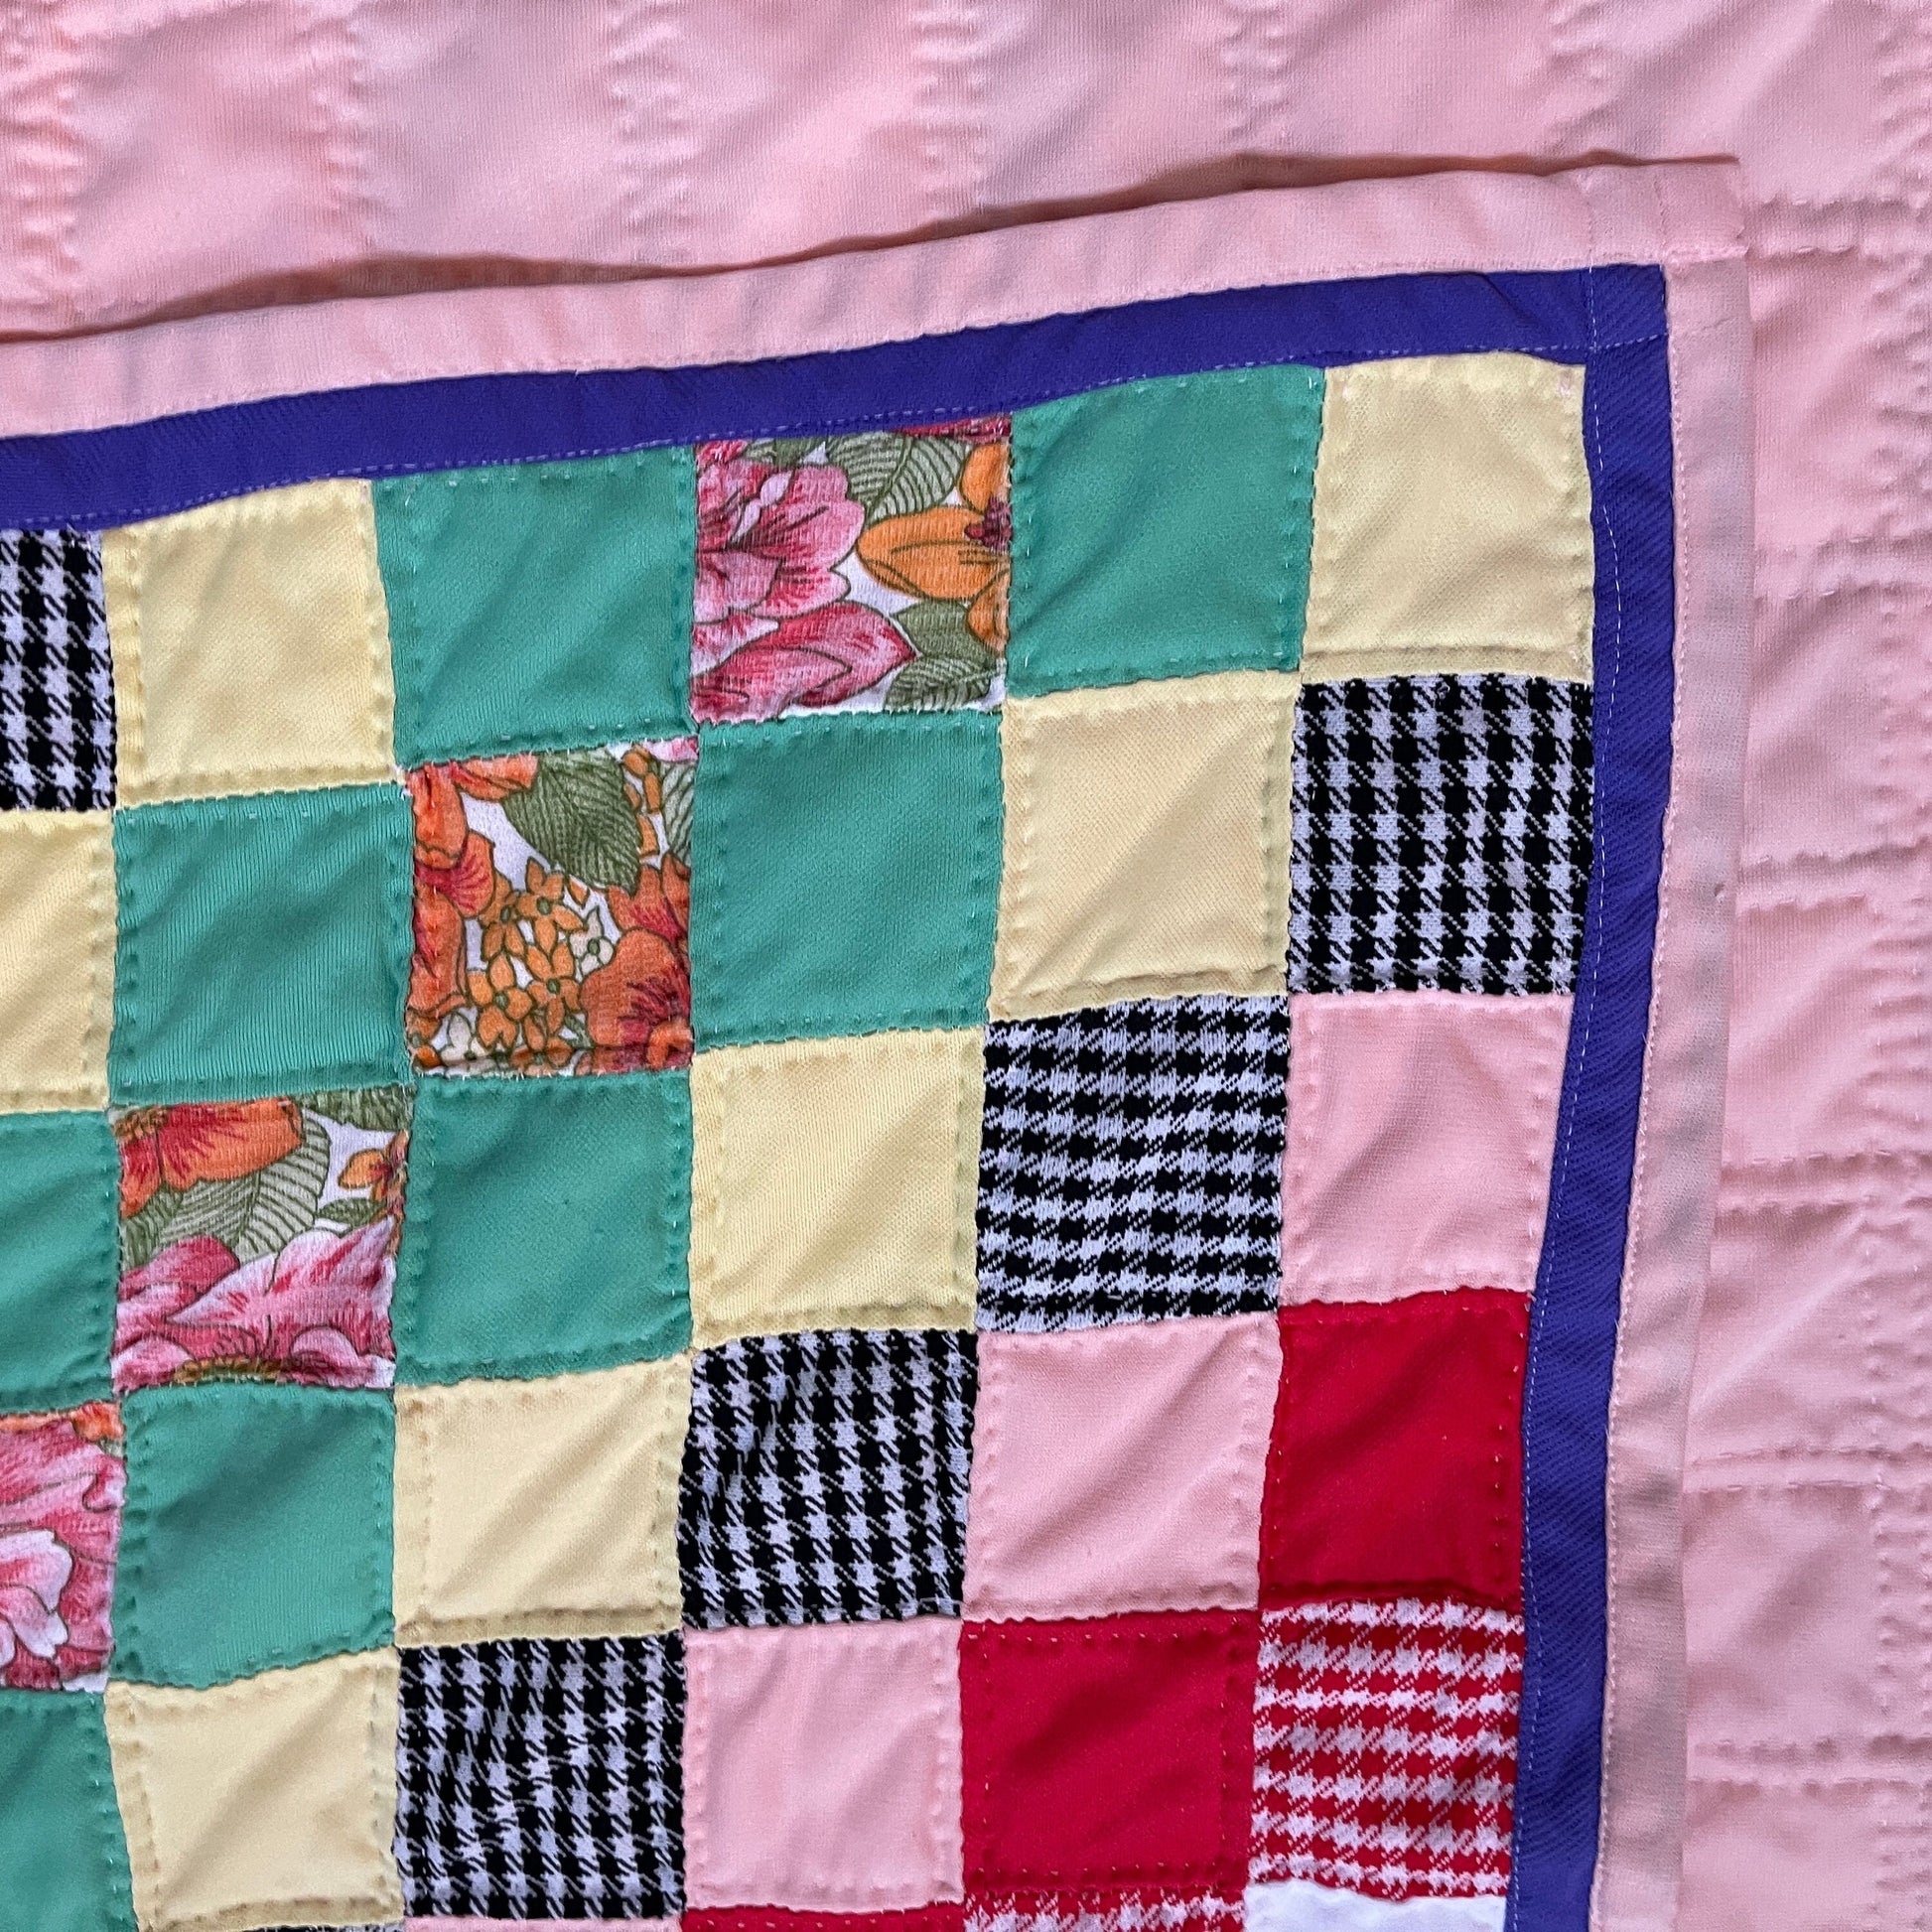 Spectacular hand made quilt vintage collectible heirloom 82 by 73 inch keepsake blanket see pictures